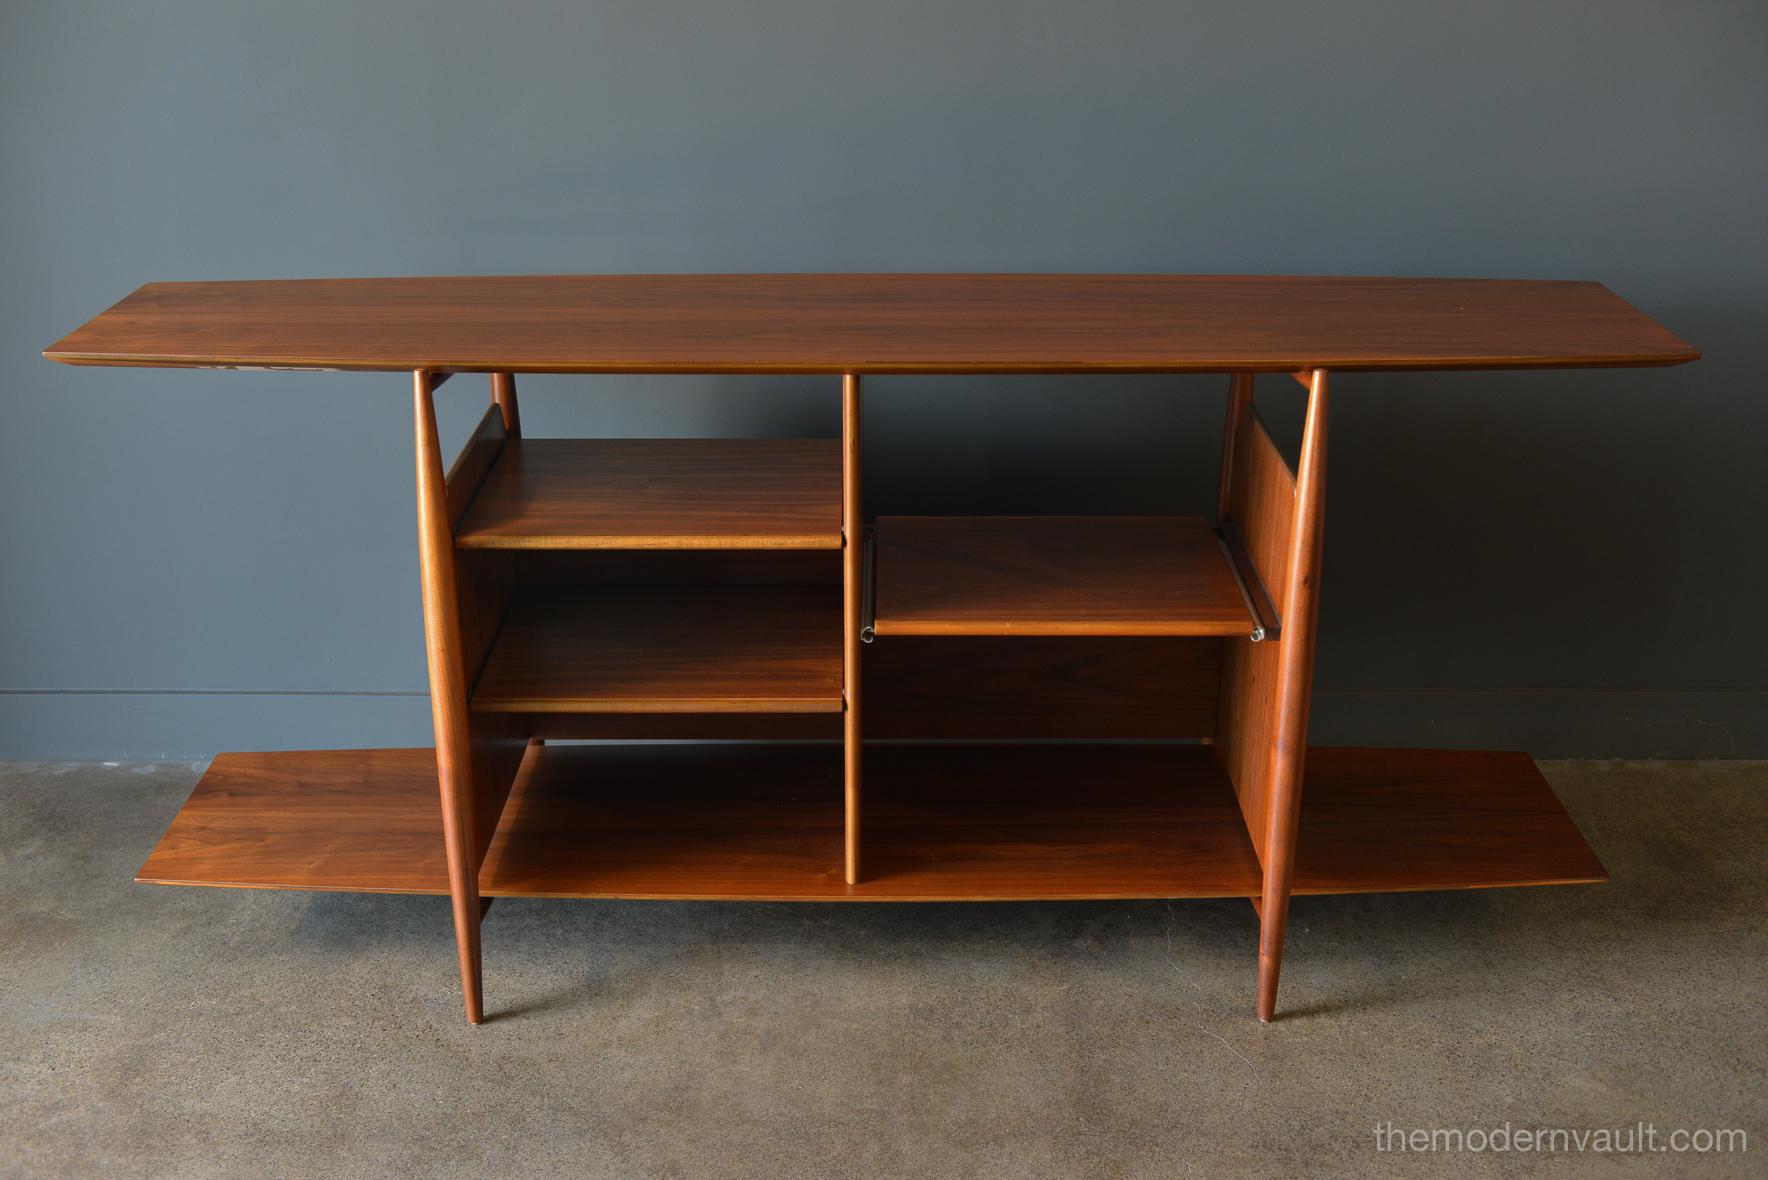 Floating walnut bookcase or media cabinet, circa 1965. Believed to be a Kipp Stewart/Stuart MacDougall design for Drexel. Rare, not often seen this piece has adjustable shelving on the left and a slide out shelf for your turntable or other media